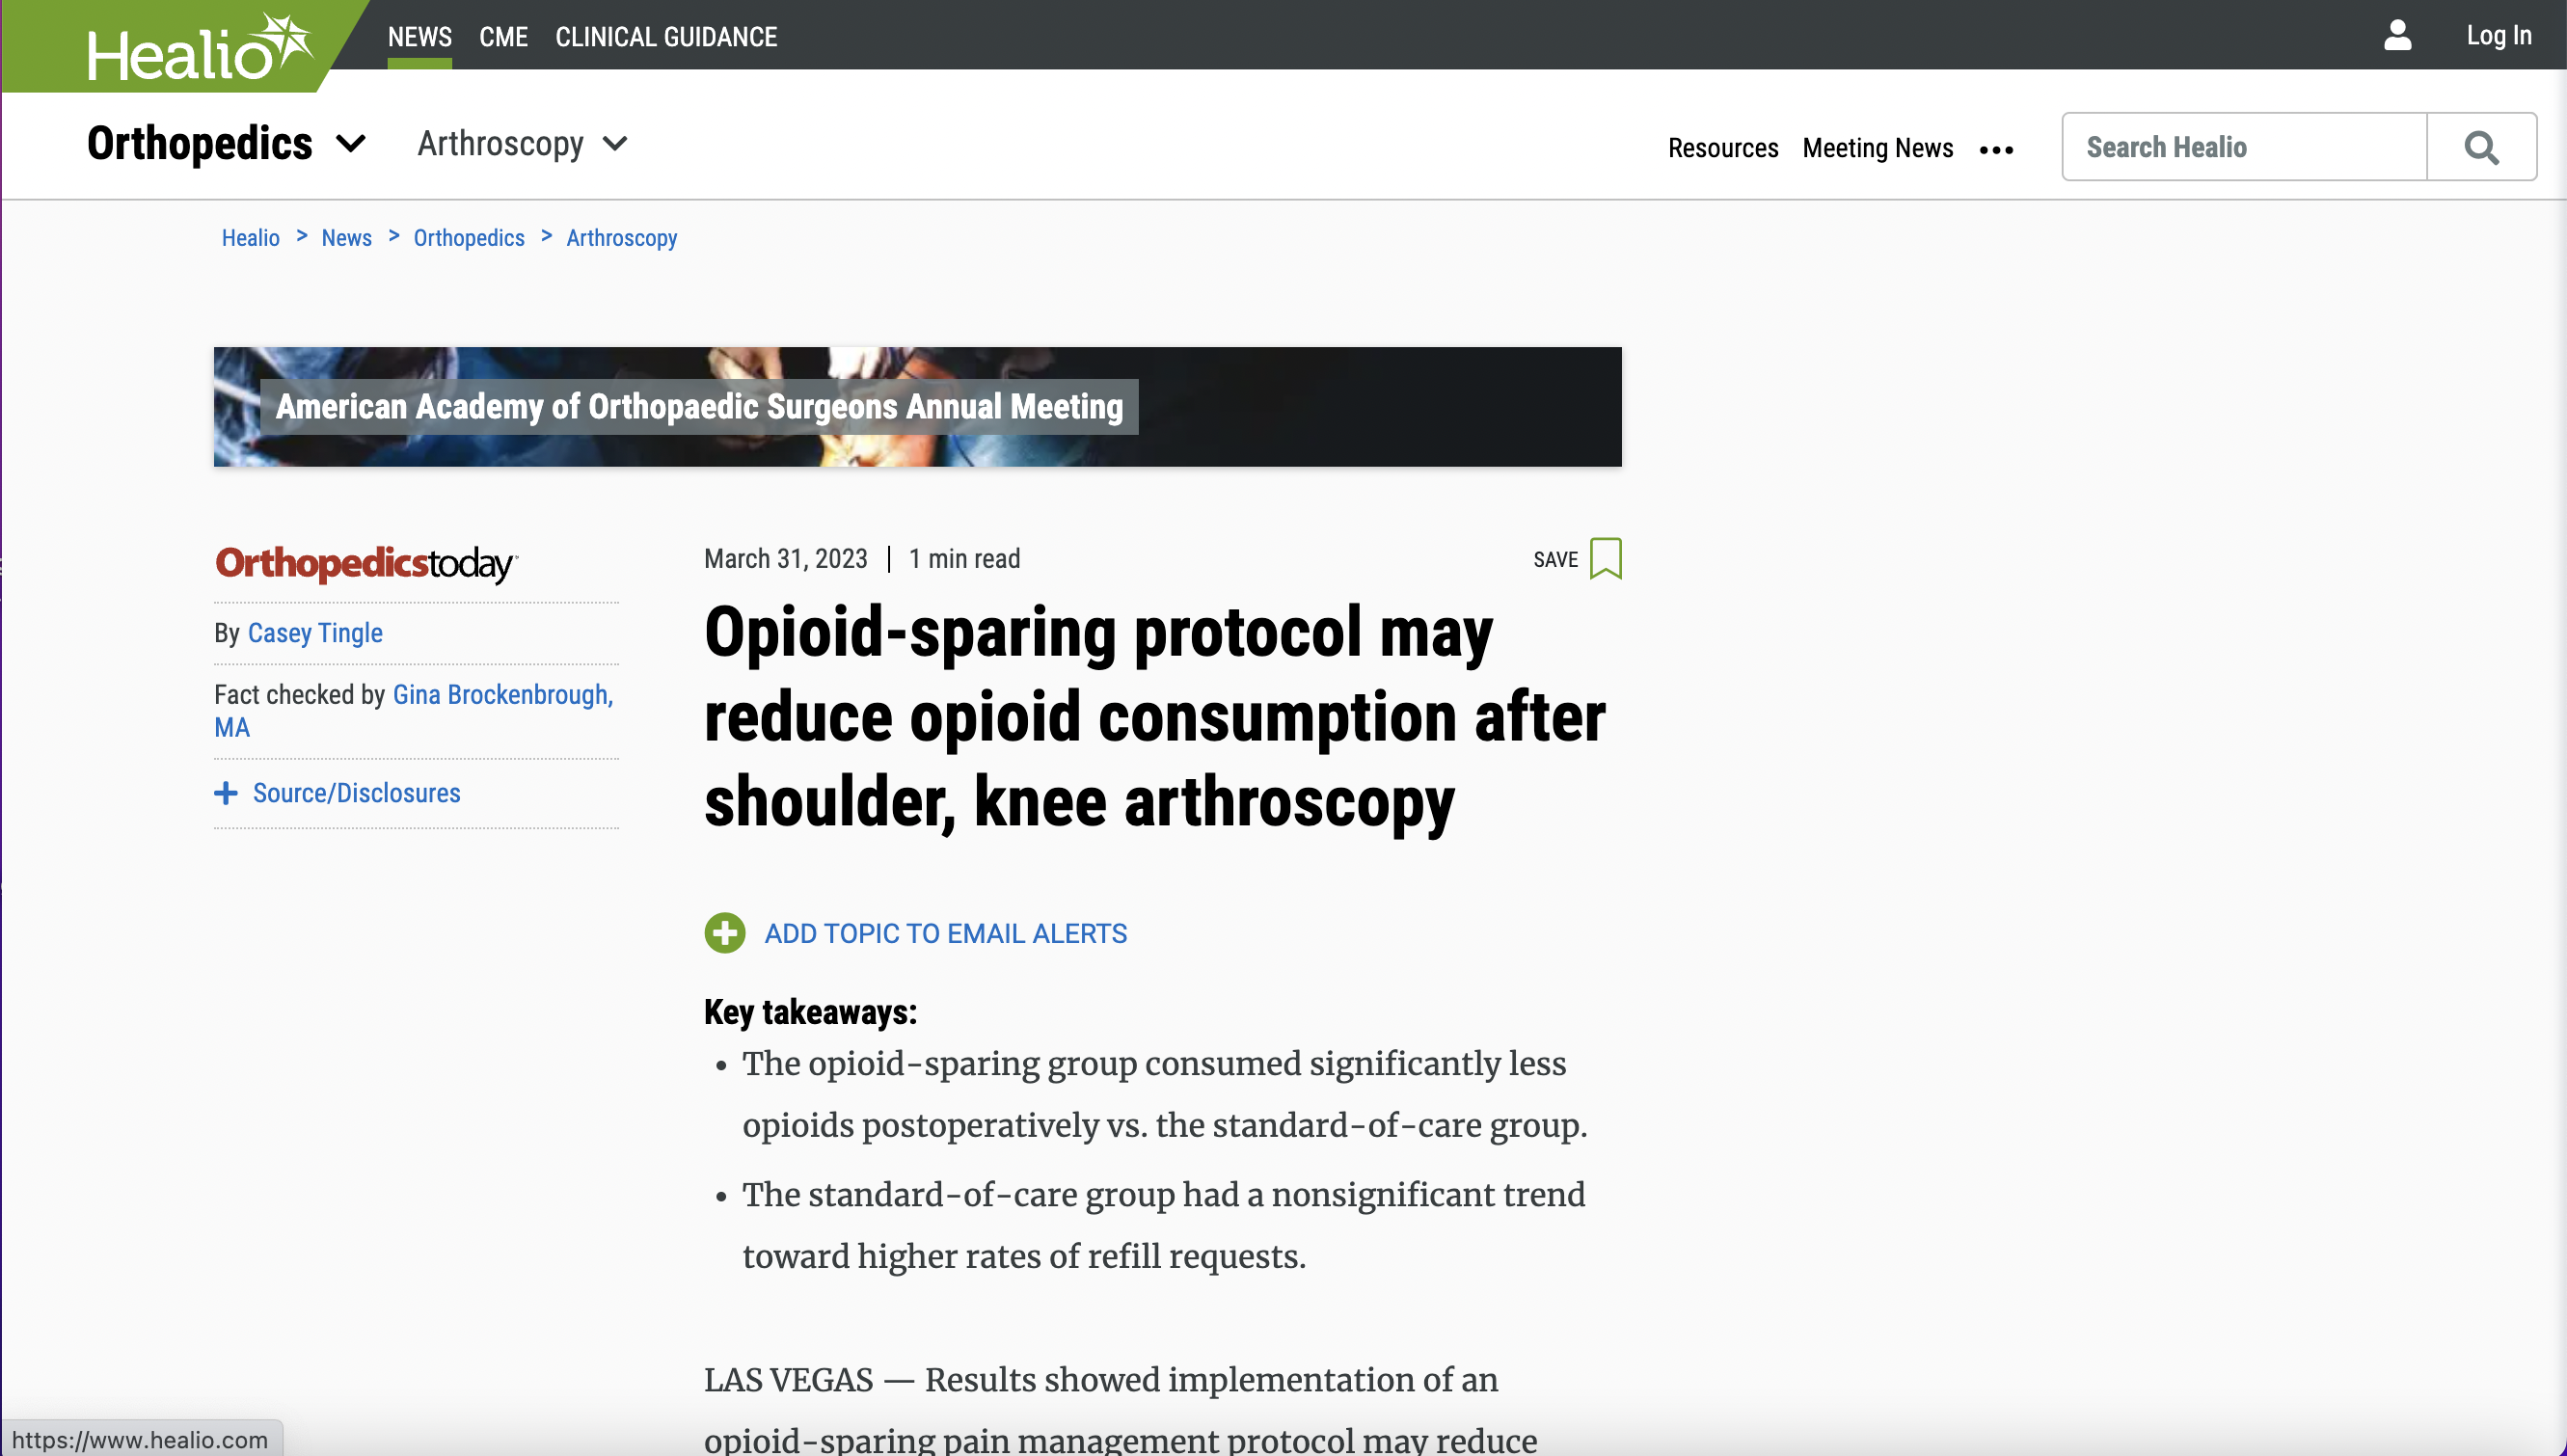 Dr. Nolan Horner Featured In Press: “Opioid-sparing protocol may reduce opioid consumption after shoulder, knee arthroscopy”